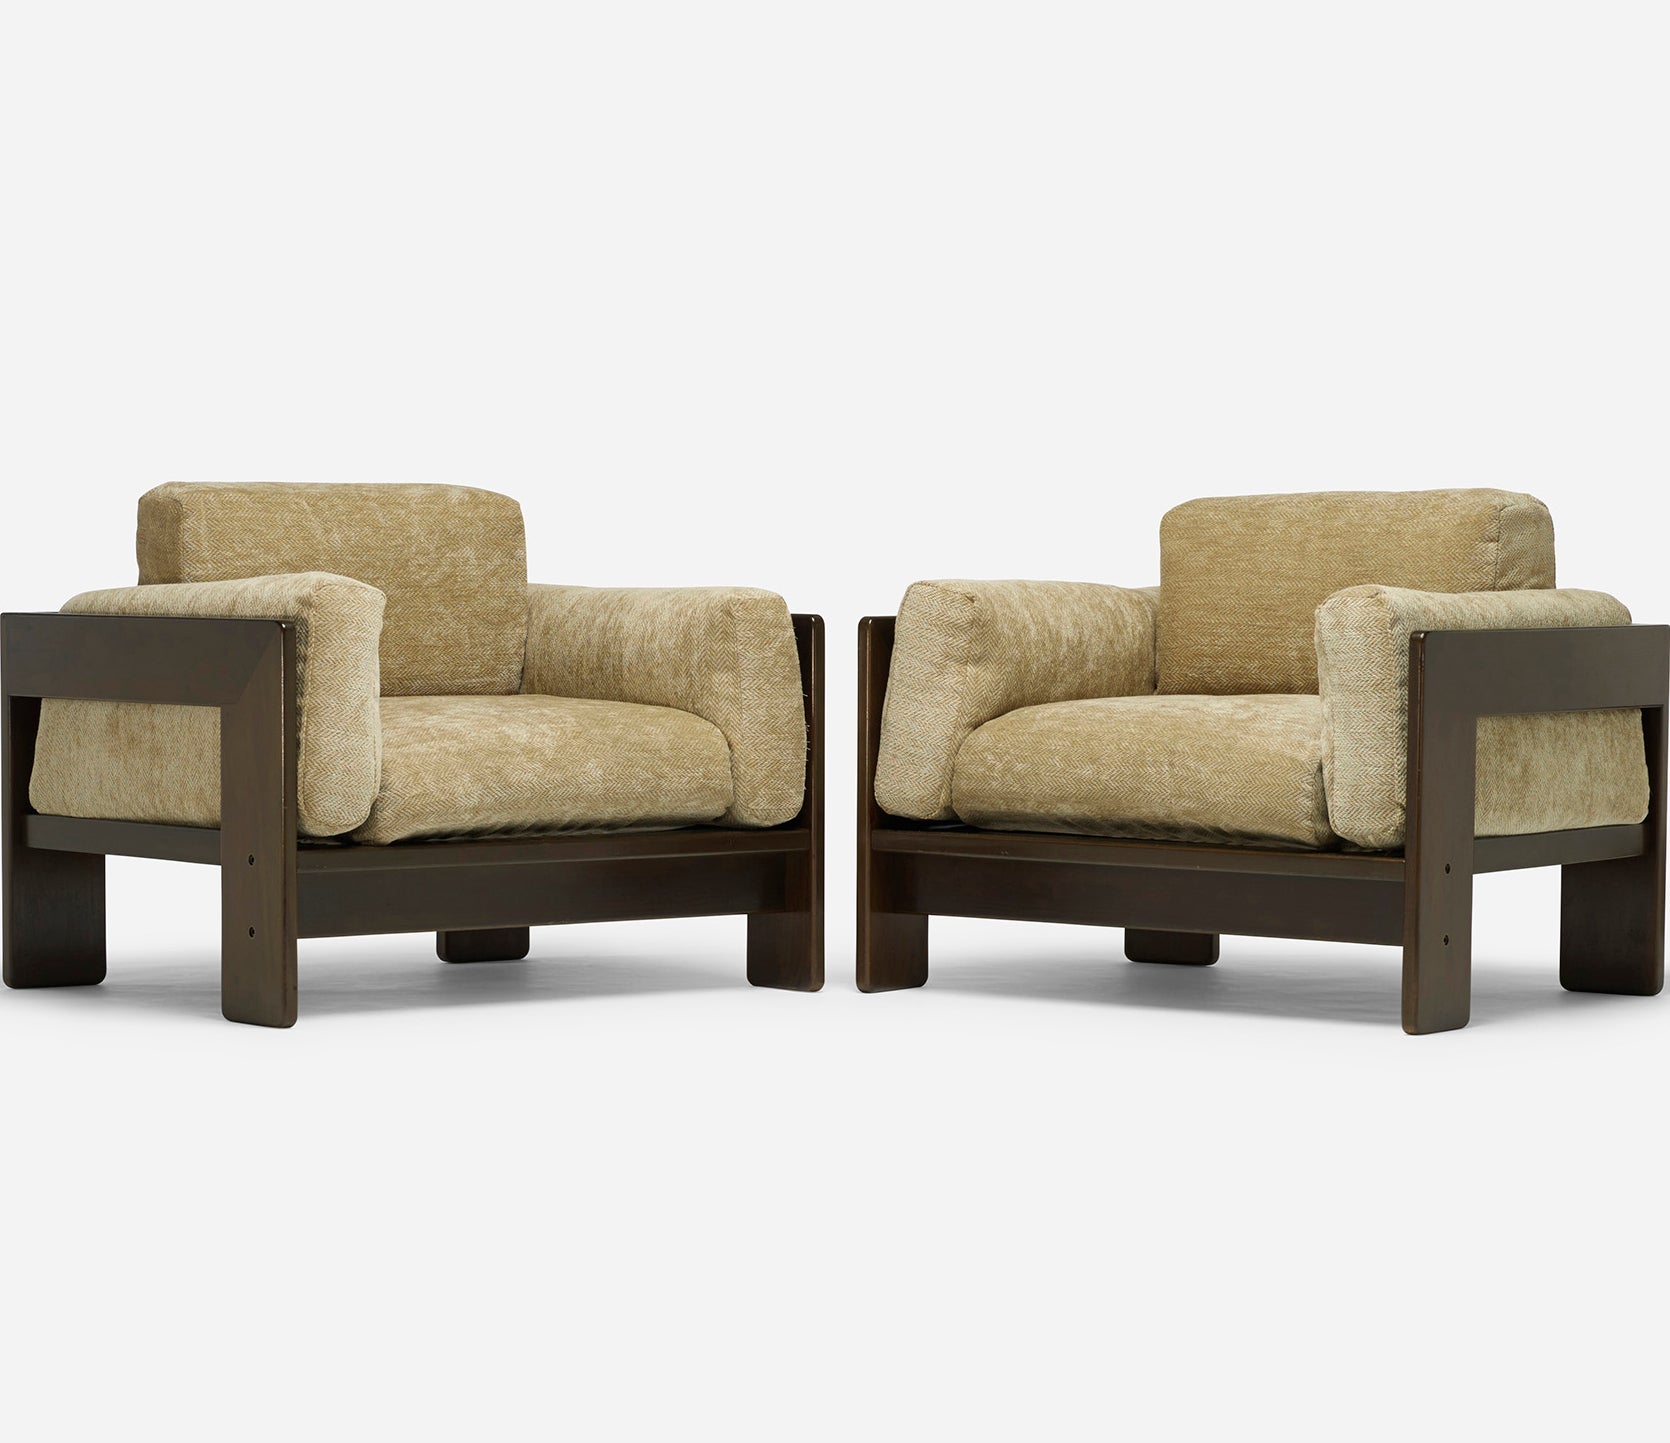 Pair of "Bastiano" Chairs by Afra and Tobia Scarpa